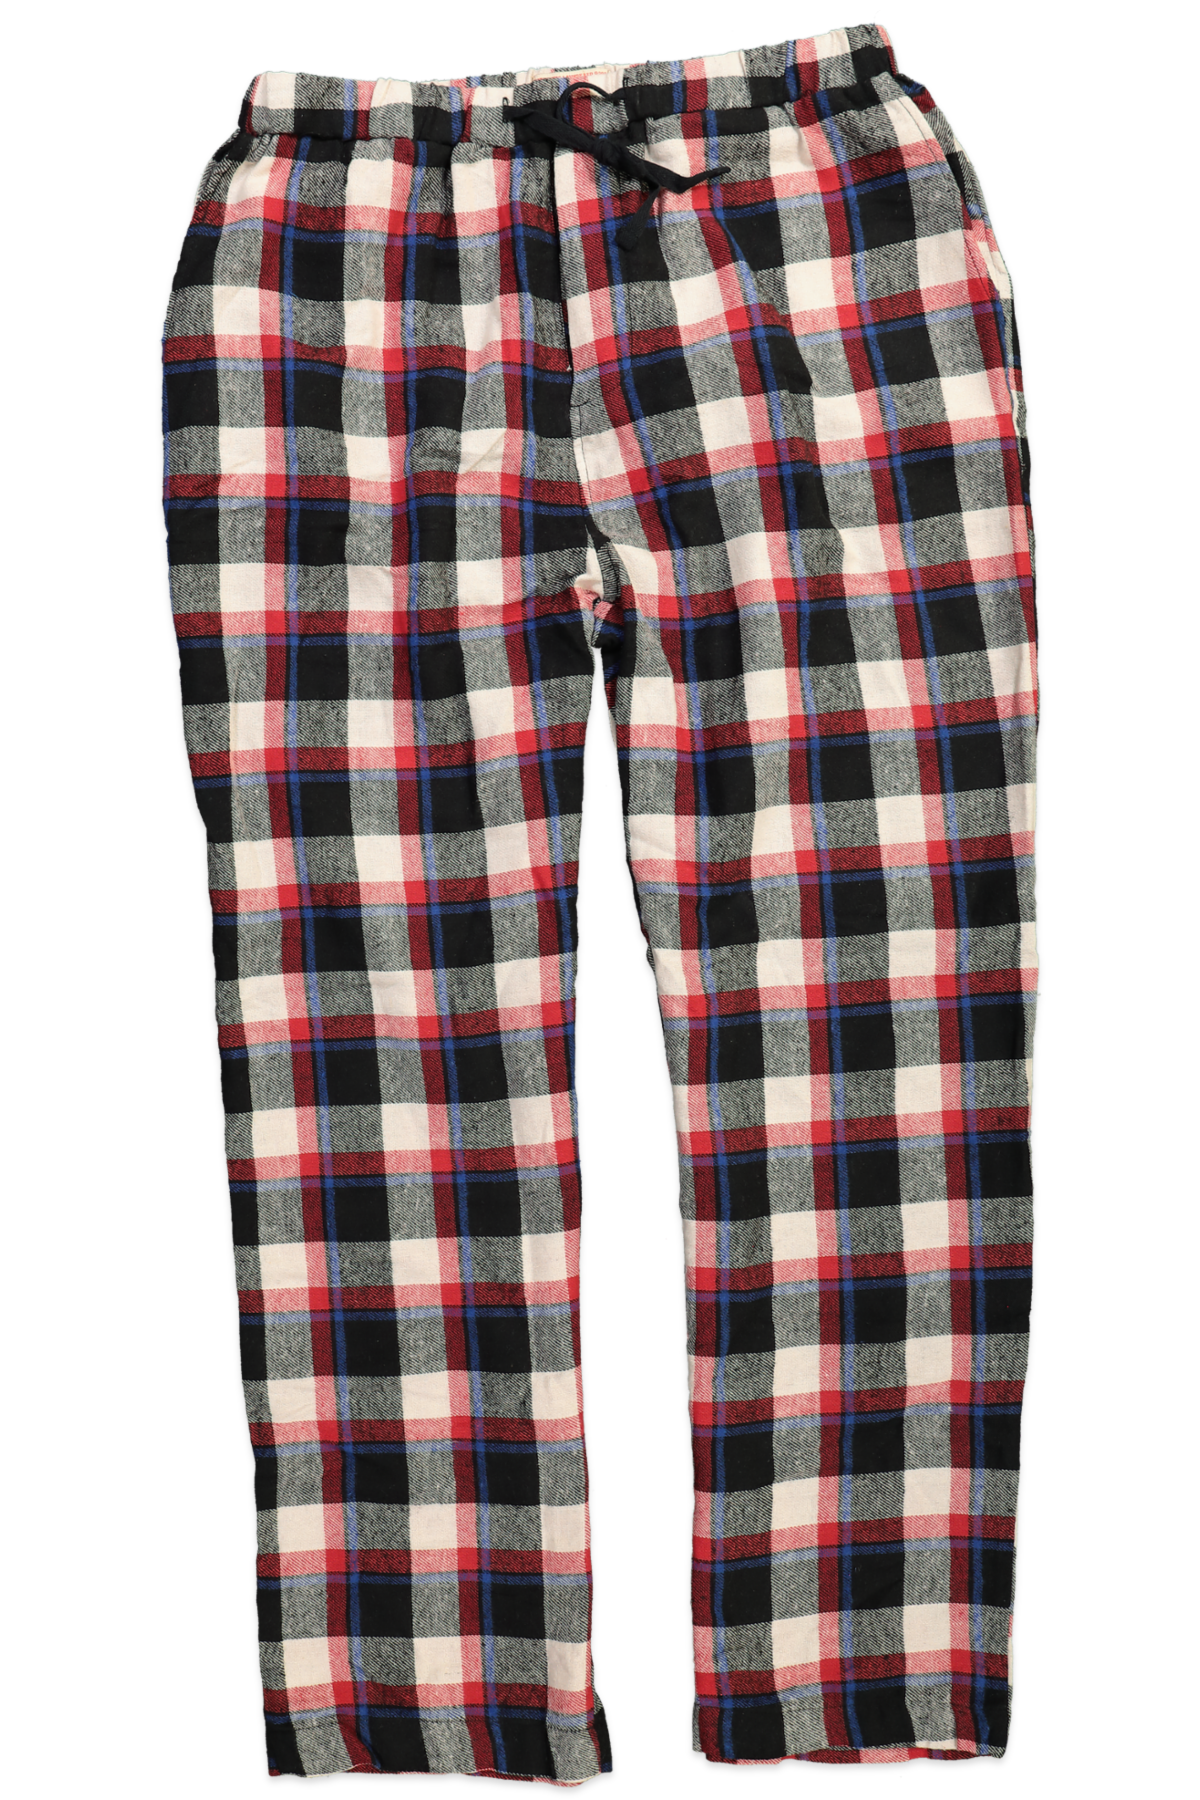 JACHS NY RED MENS FLANNEL PANTS